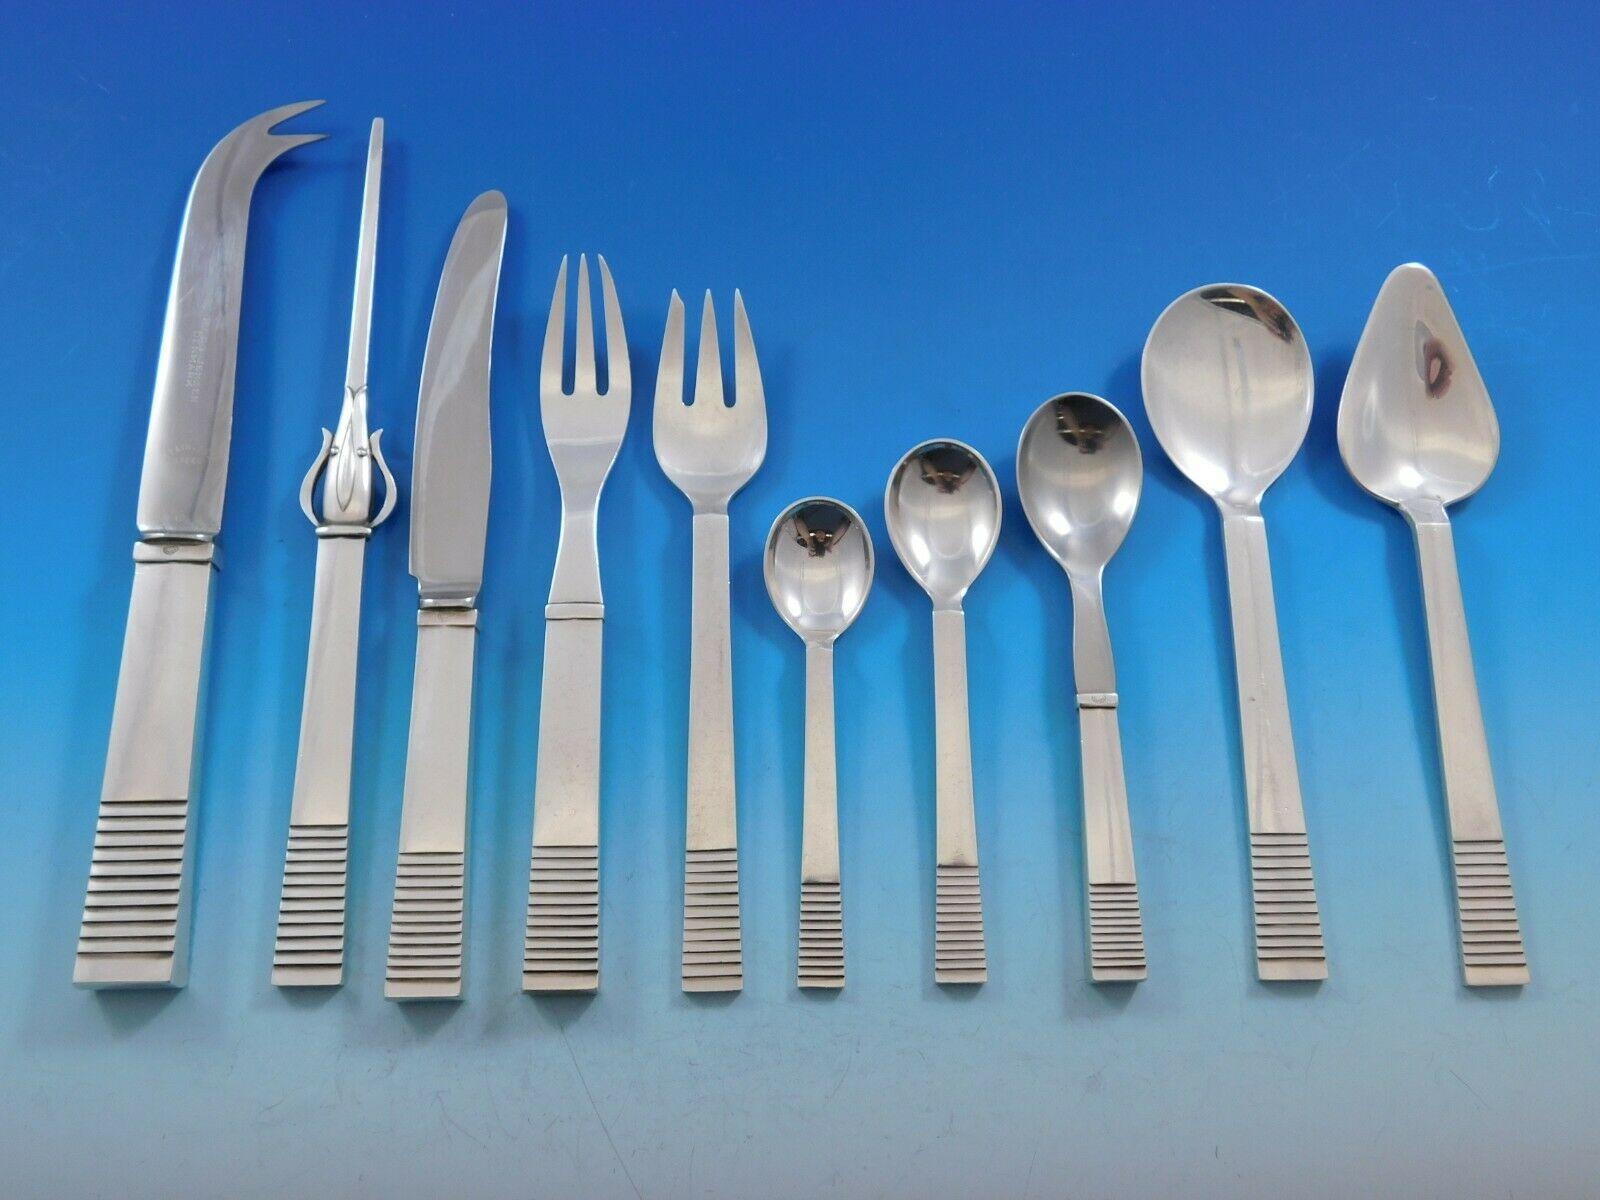 Incredible dinner size parallel by Georg Jensen sterling silver flatware set, 401 pieces. This set includes:


24 dinner size knives with long handles, 8 1/2